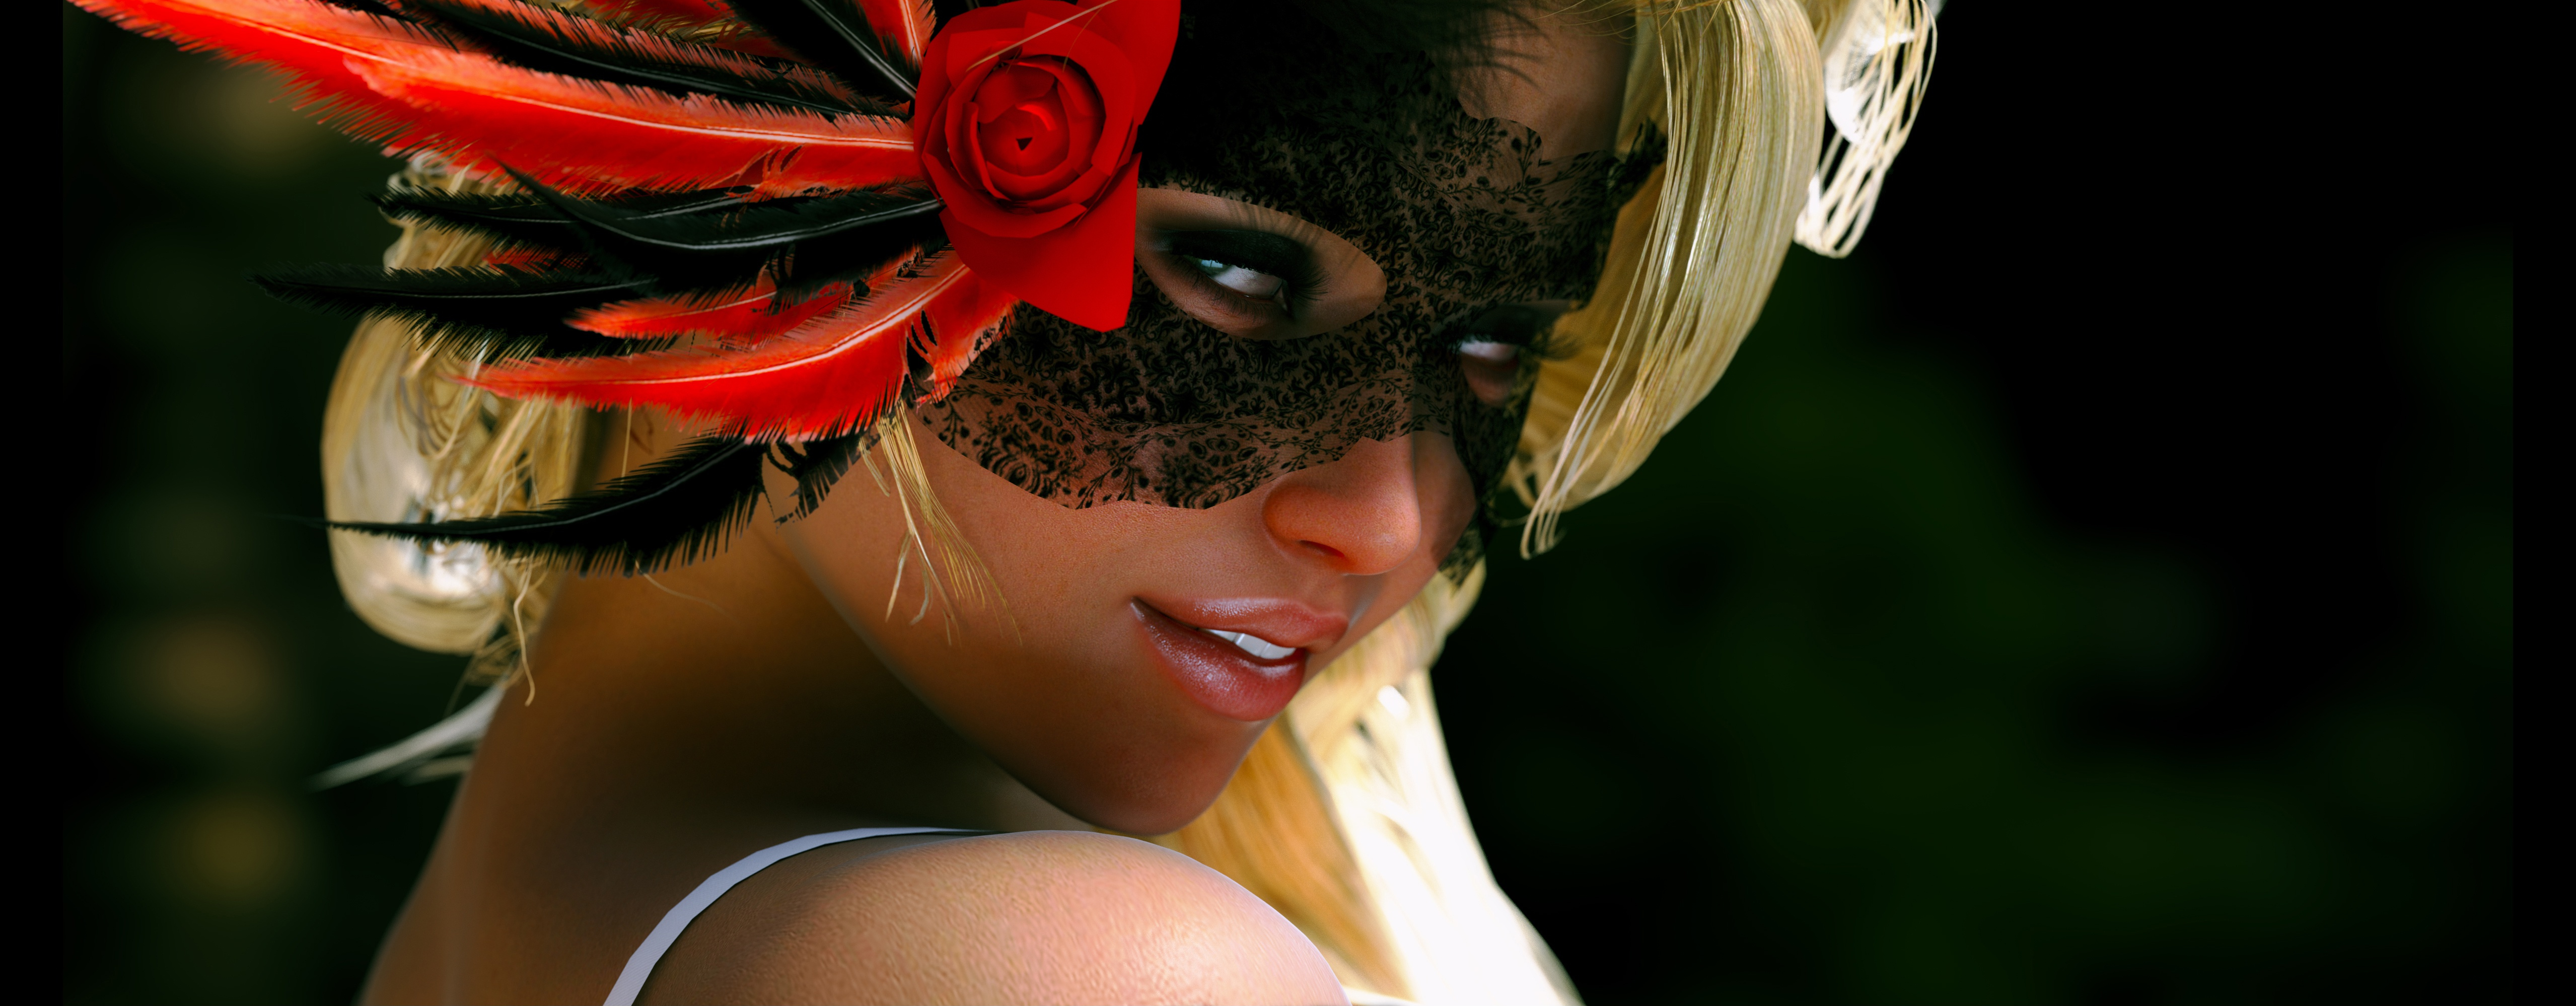 Black Feather Girl Mask Rose Woman 5116x1998